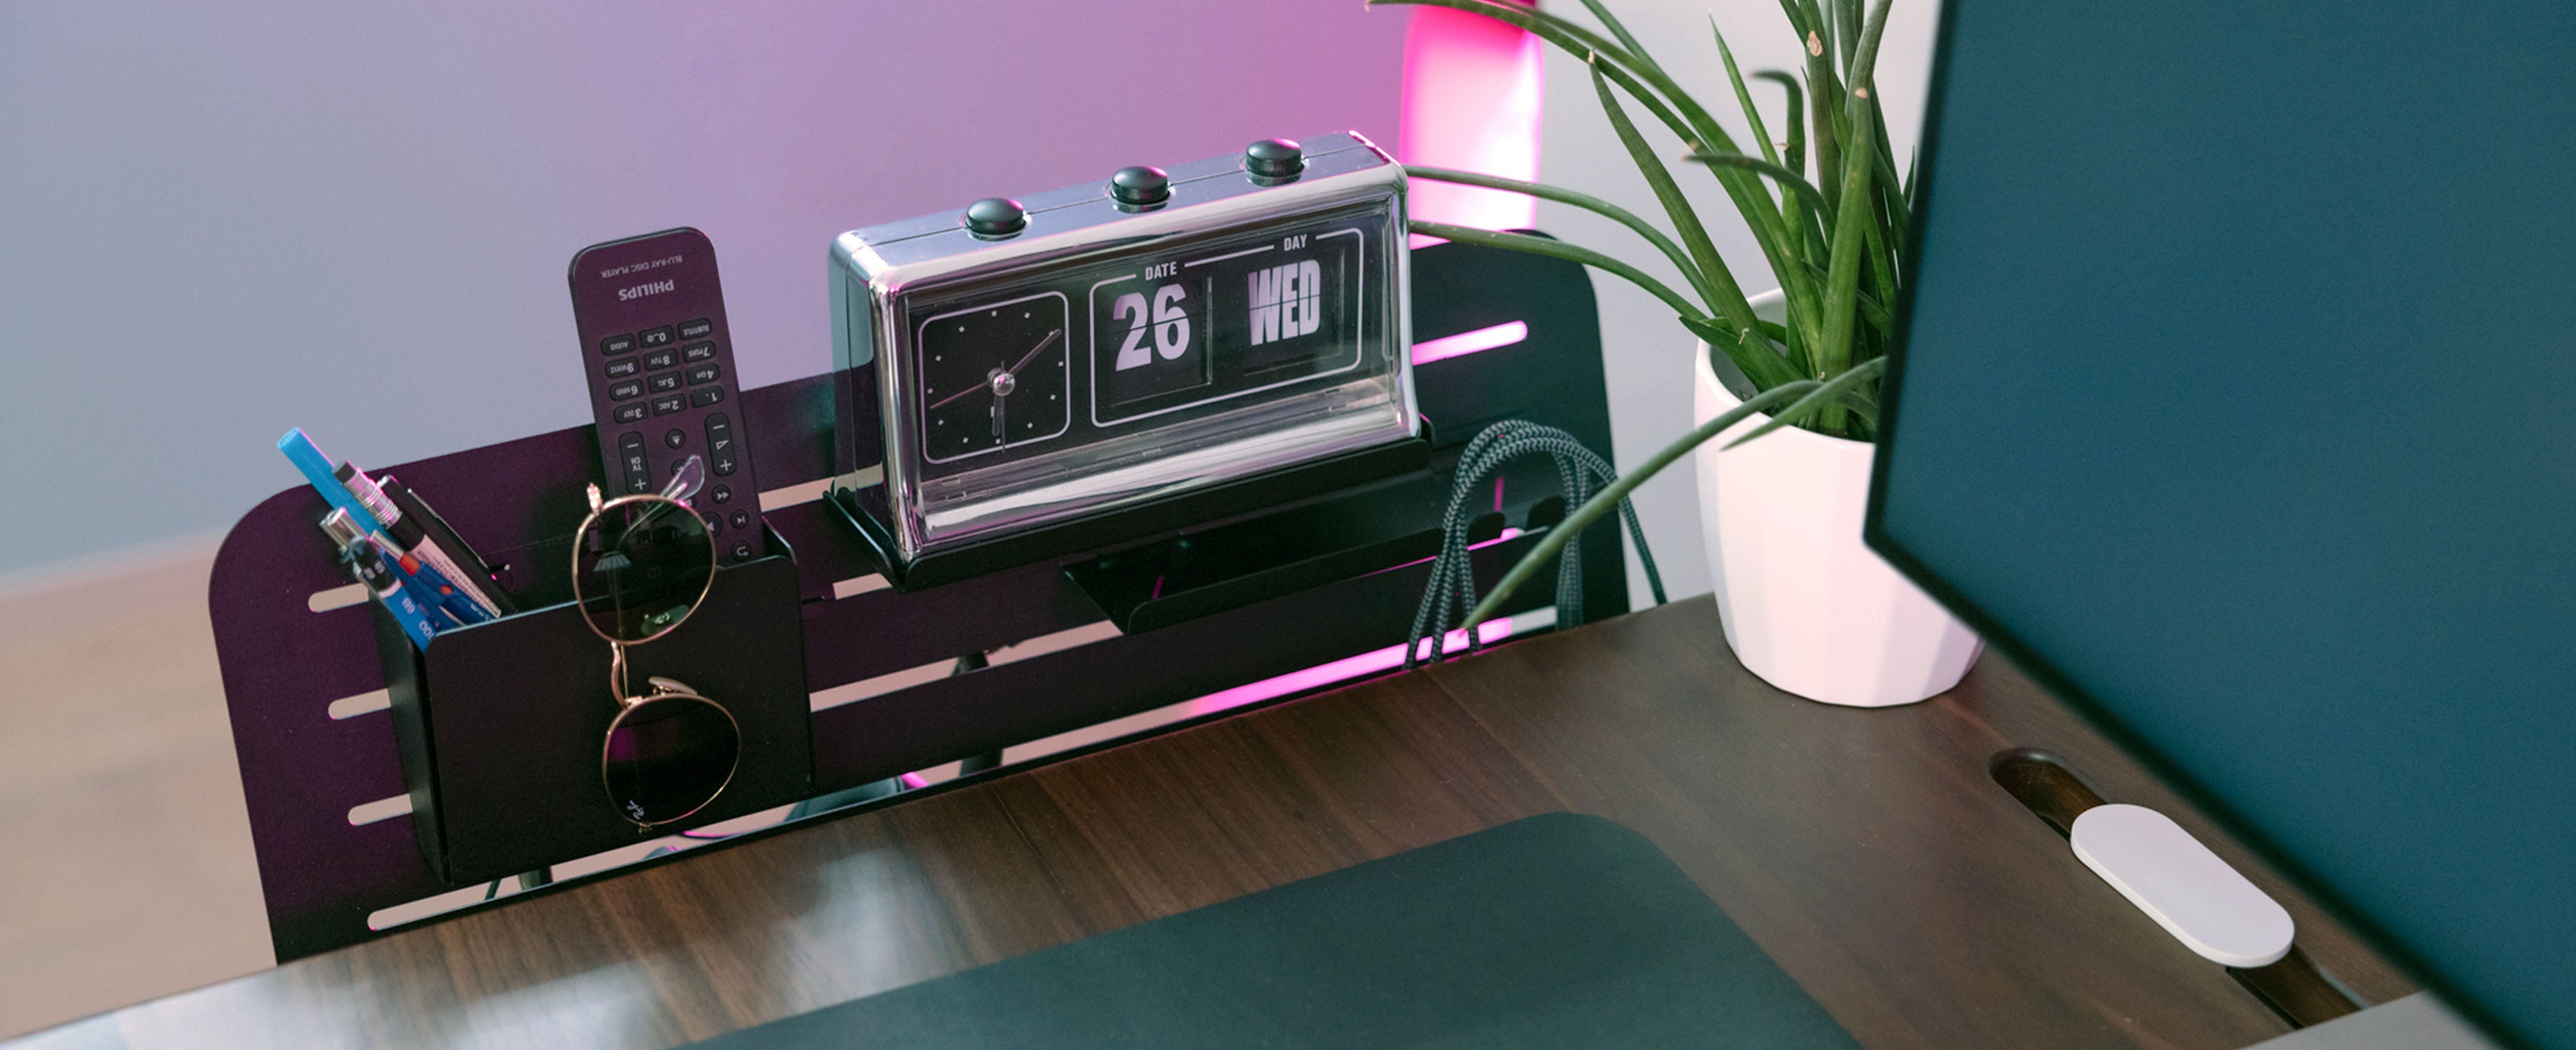 7 Must-Have Desk Accessories to Boost Your Productivity - Dynamic